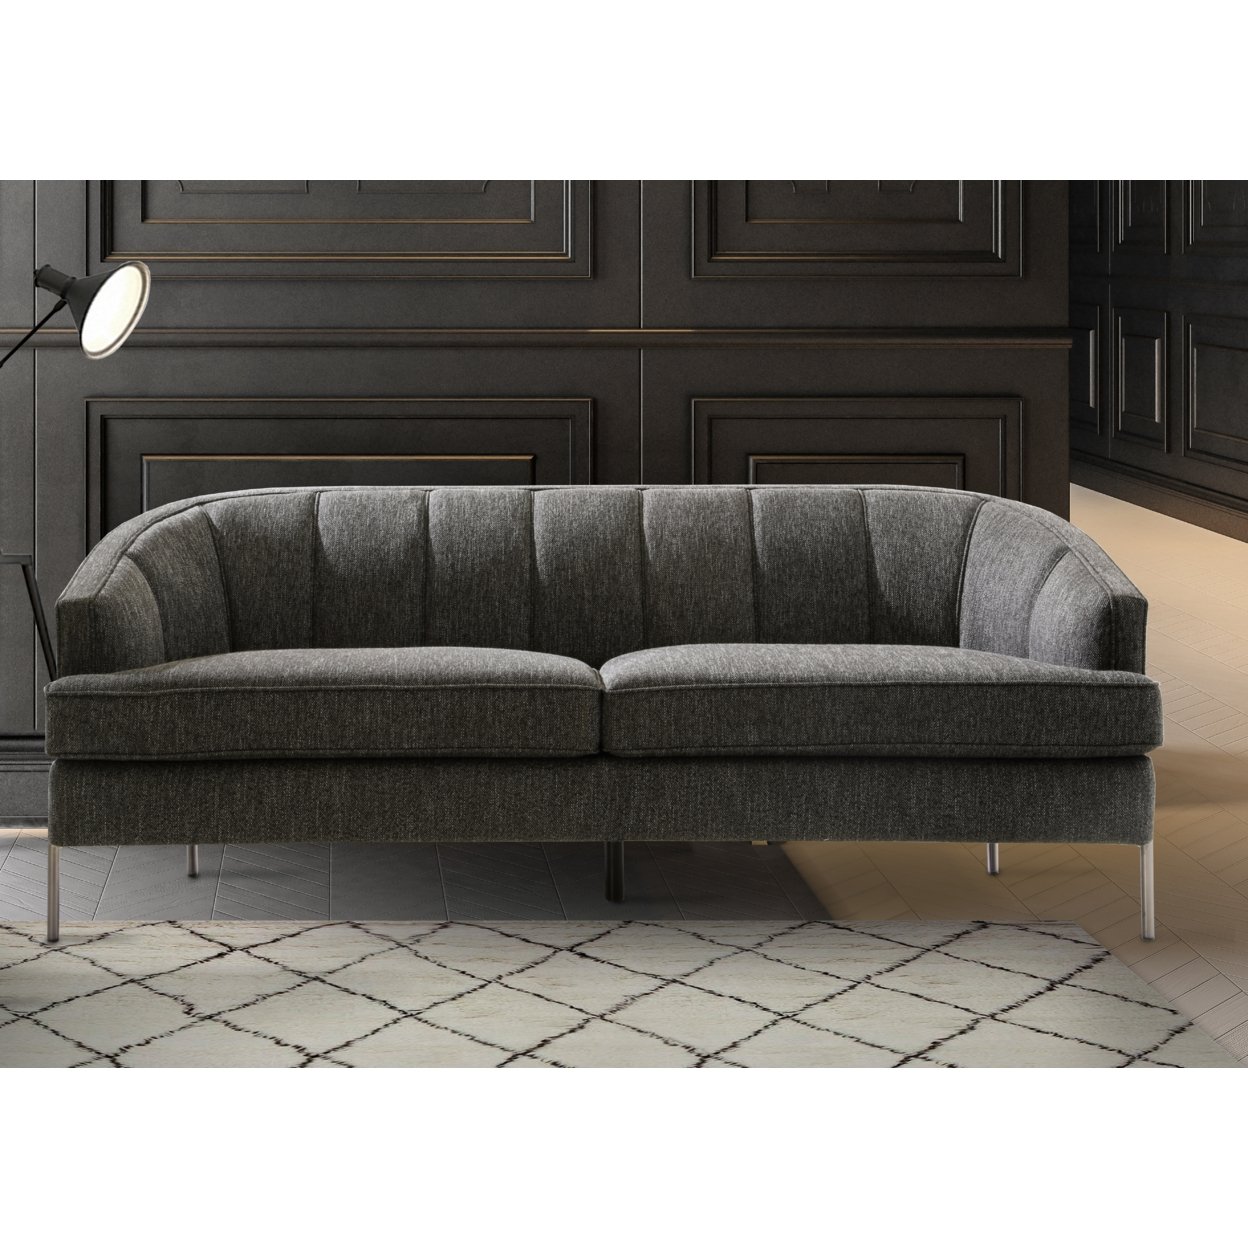 Zafrina Sofa Barrel Back 2 T-Shaped Seat Cushion Design Linen-Textured Upholstery Vertical Channel-Quilted Espresso Solid Metal Legs - Black